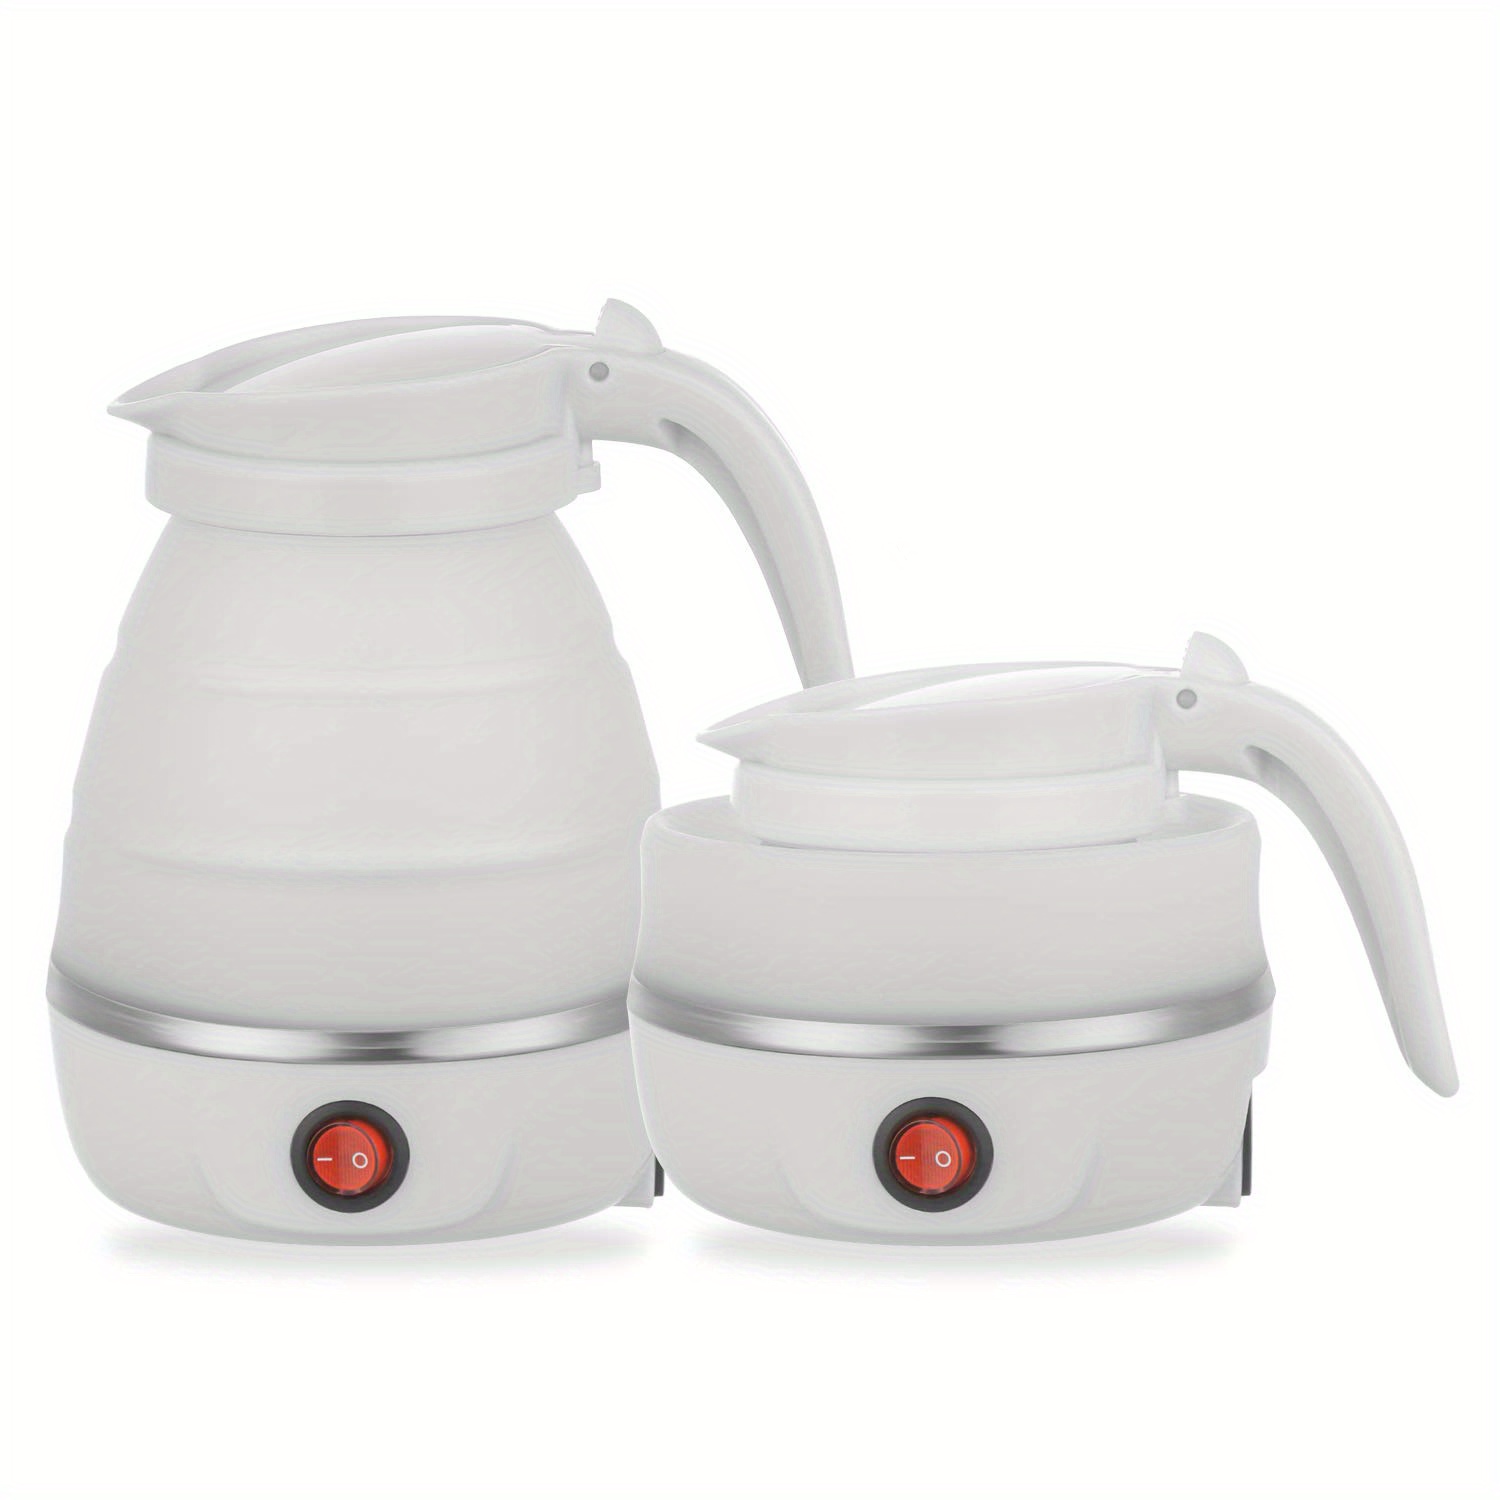 110V / 220V Electric Kettle Foldable Silicone Portable Water Kettle